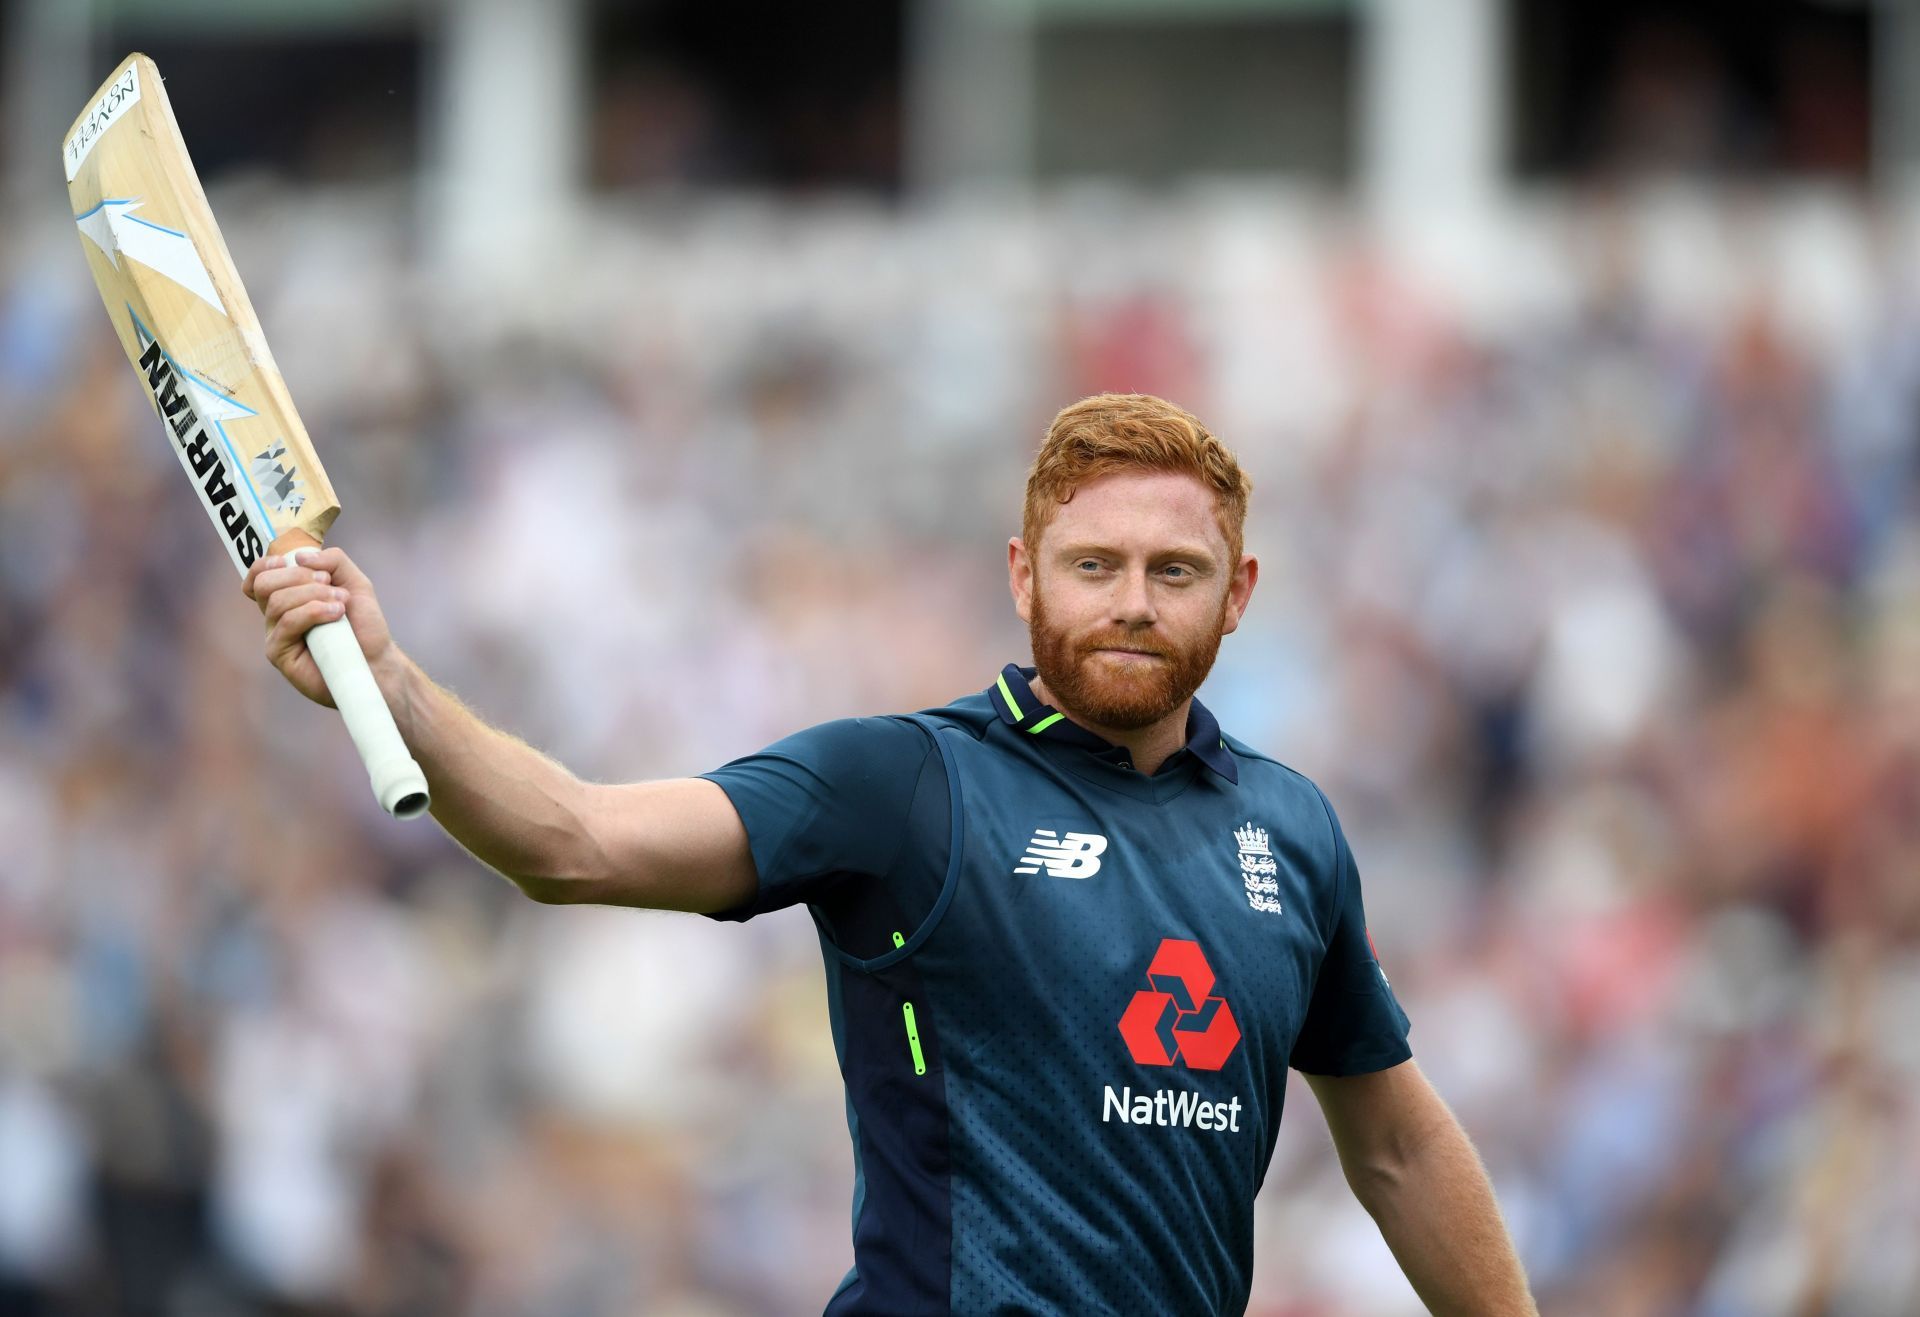 Jonny Bairstow came close to scoring his second IPL century, hitting 97 off 55 deliveries, against Punjab in IPL 2020